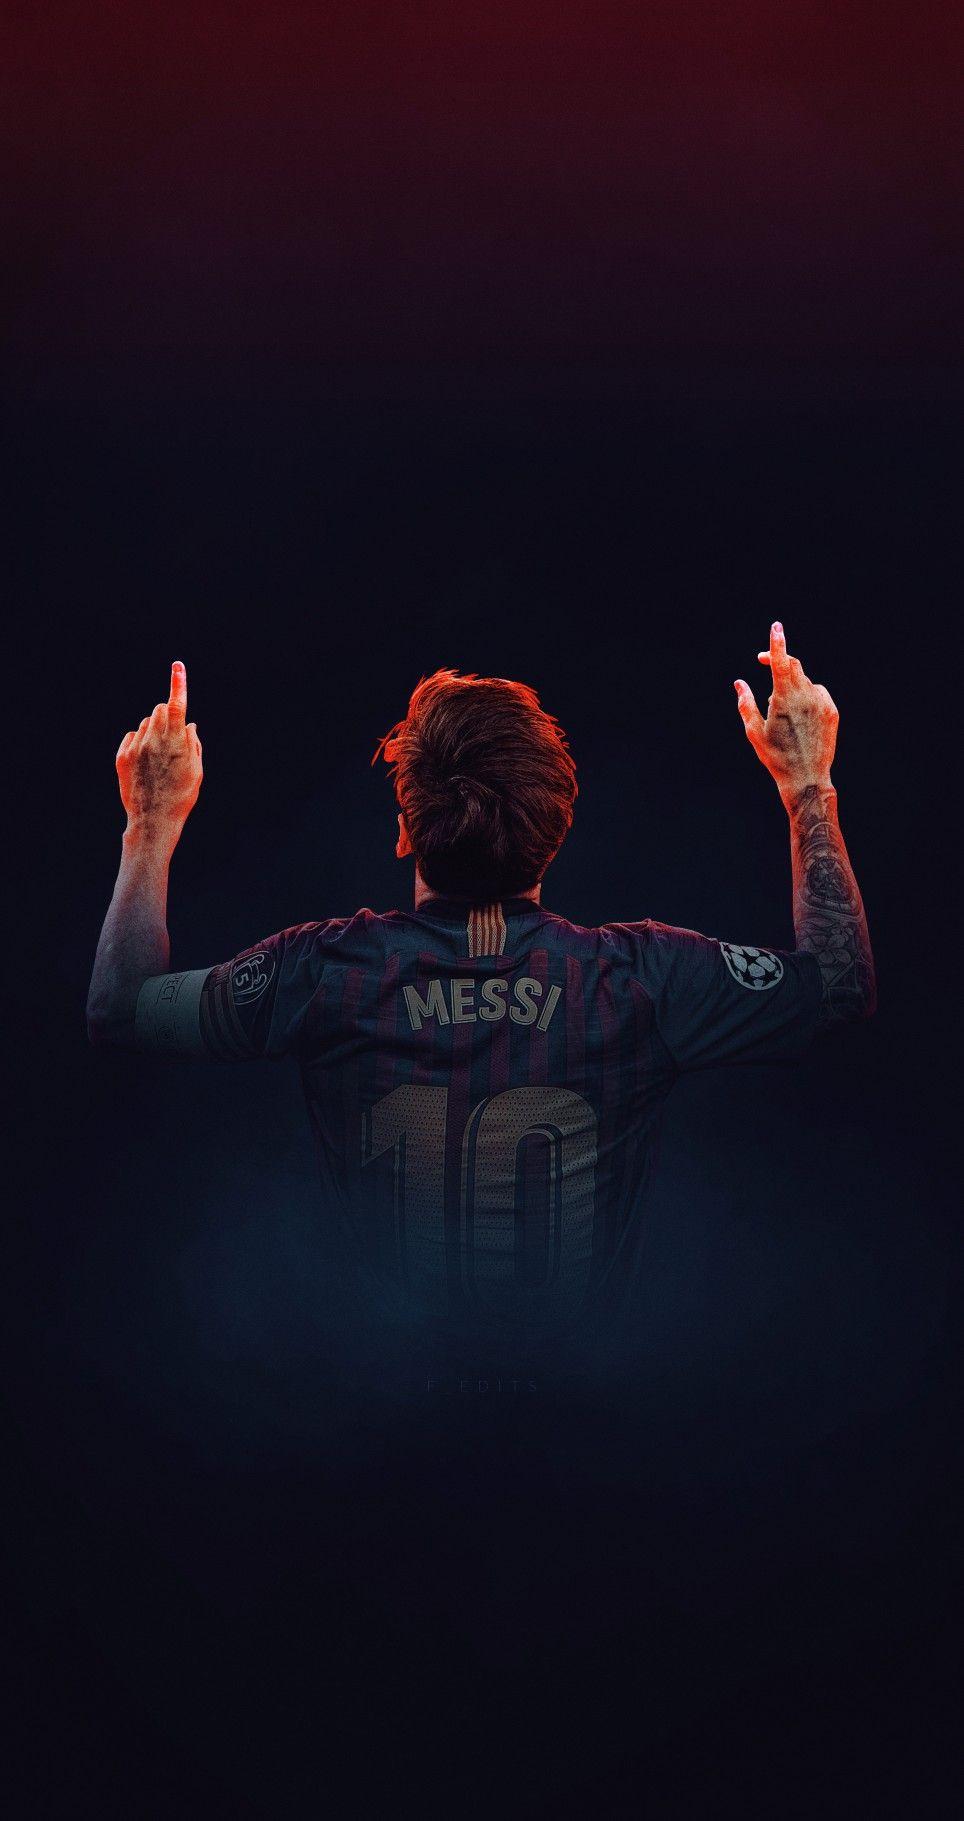 The best player. The greatest of all time #messi #goat